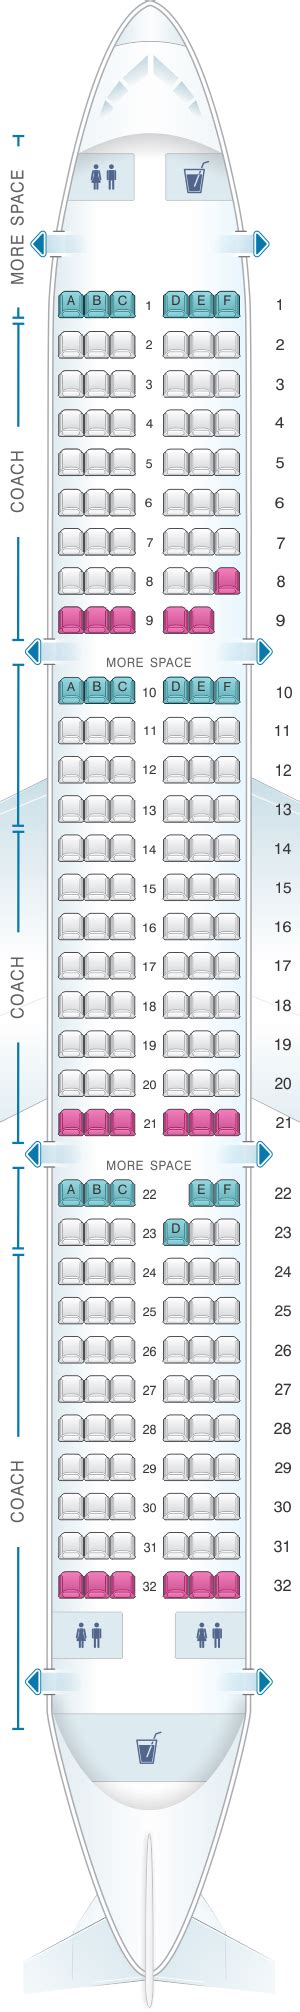 JetBlues A220 aircraft features a 3-2 configuration with five rows of Even More Space seats and 23 regular economy rows. . Airbus a321 seat map jetblue